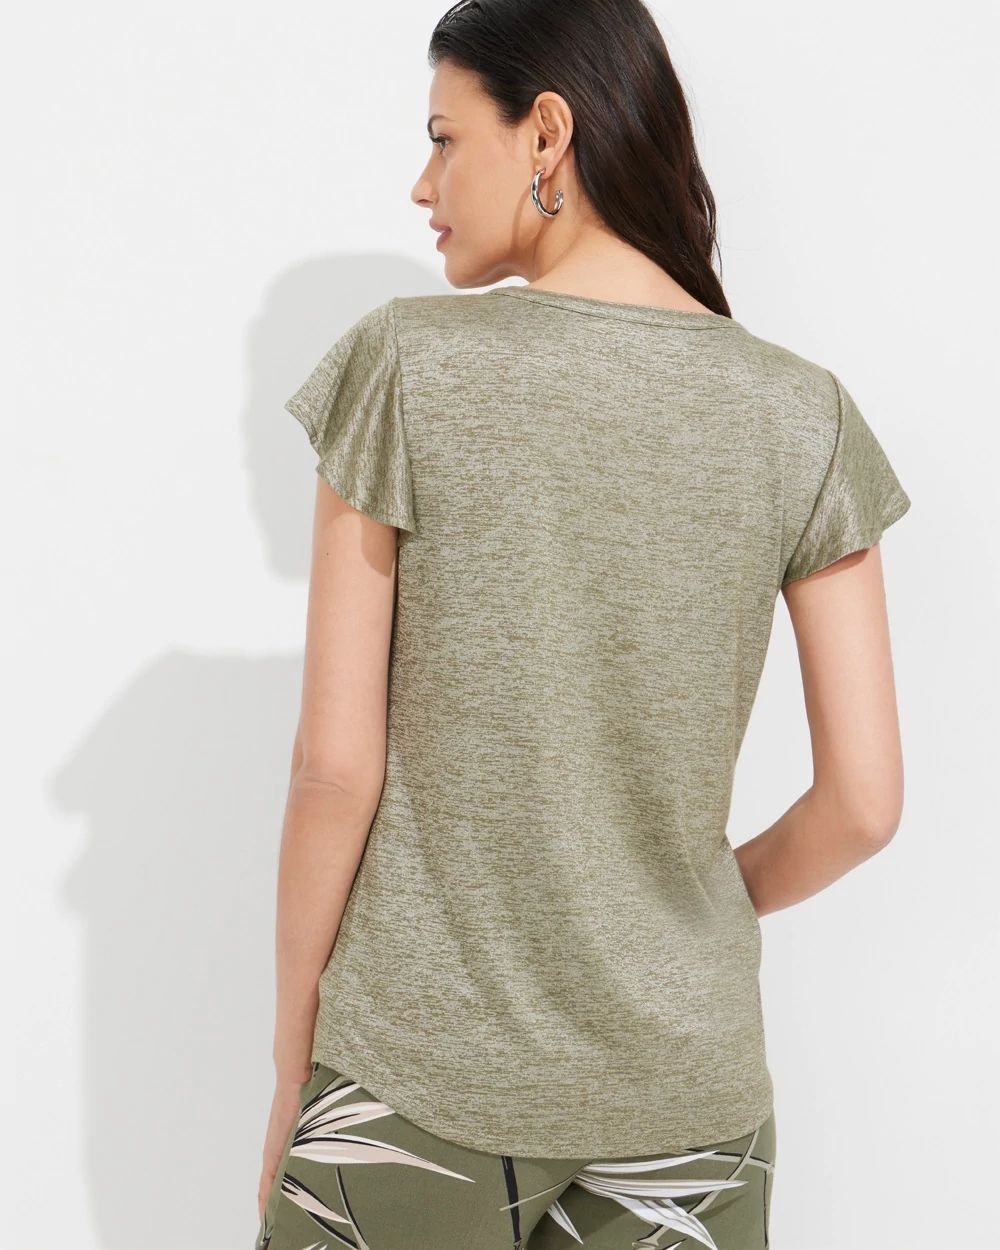 Outlet WHBM Notch-Neck Ruffle-Sleeve Tee click to view larger image.